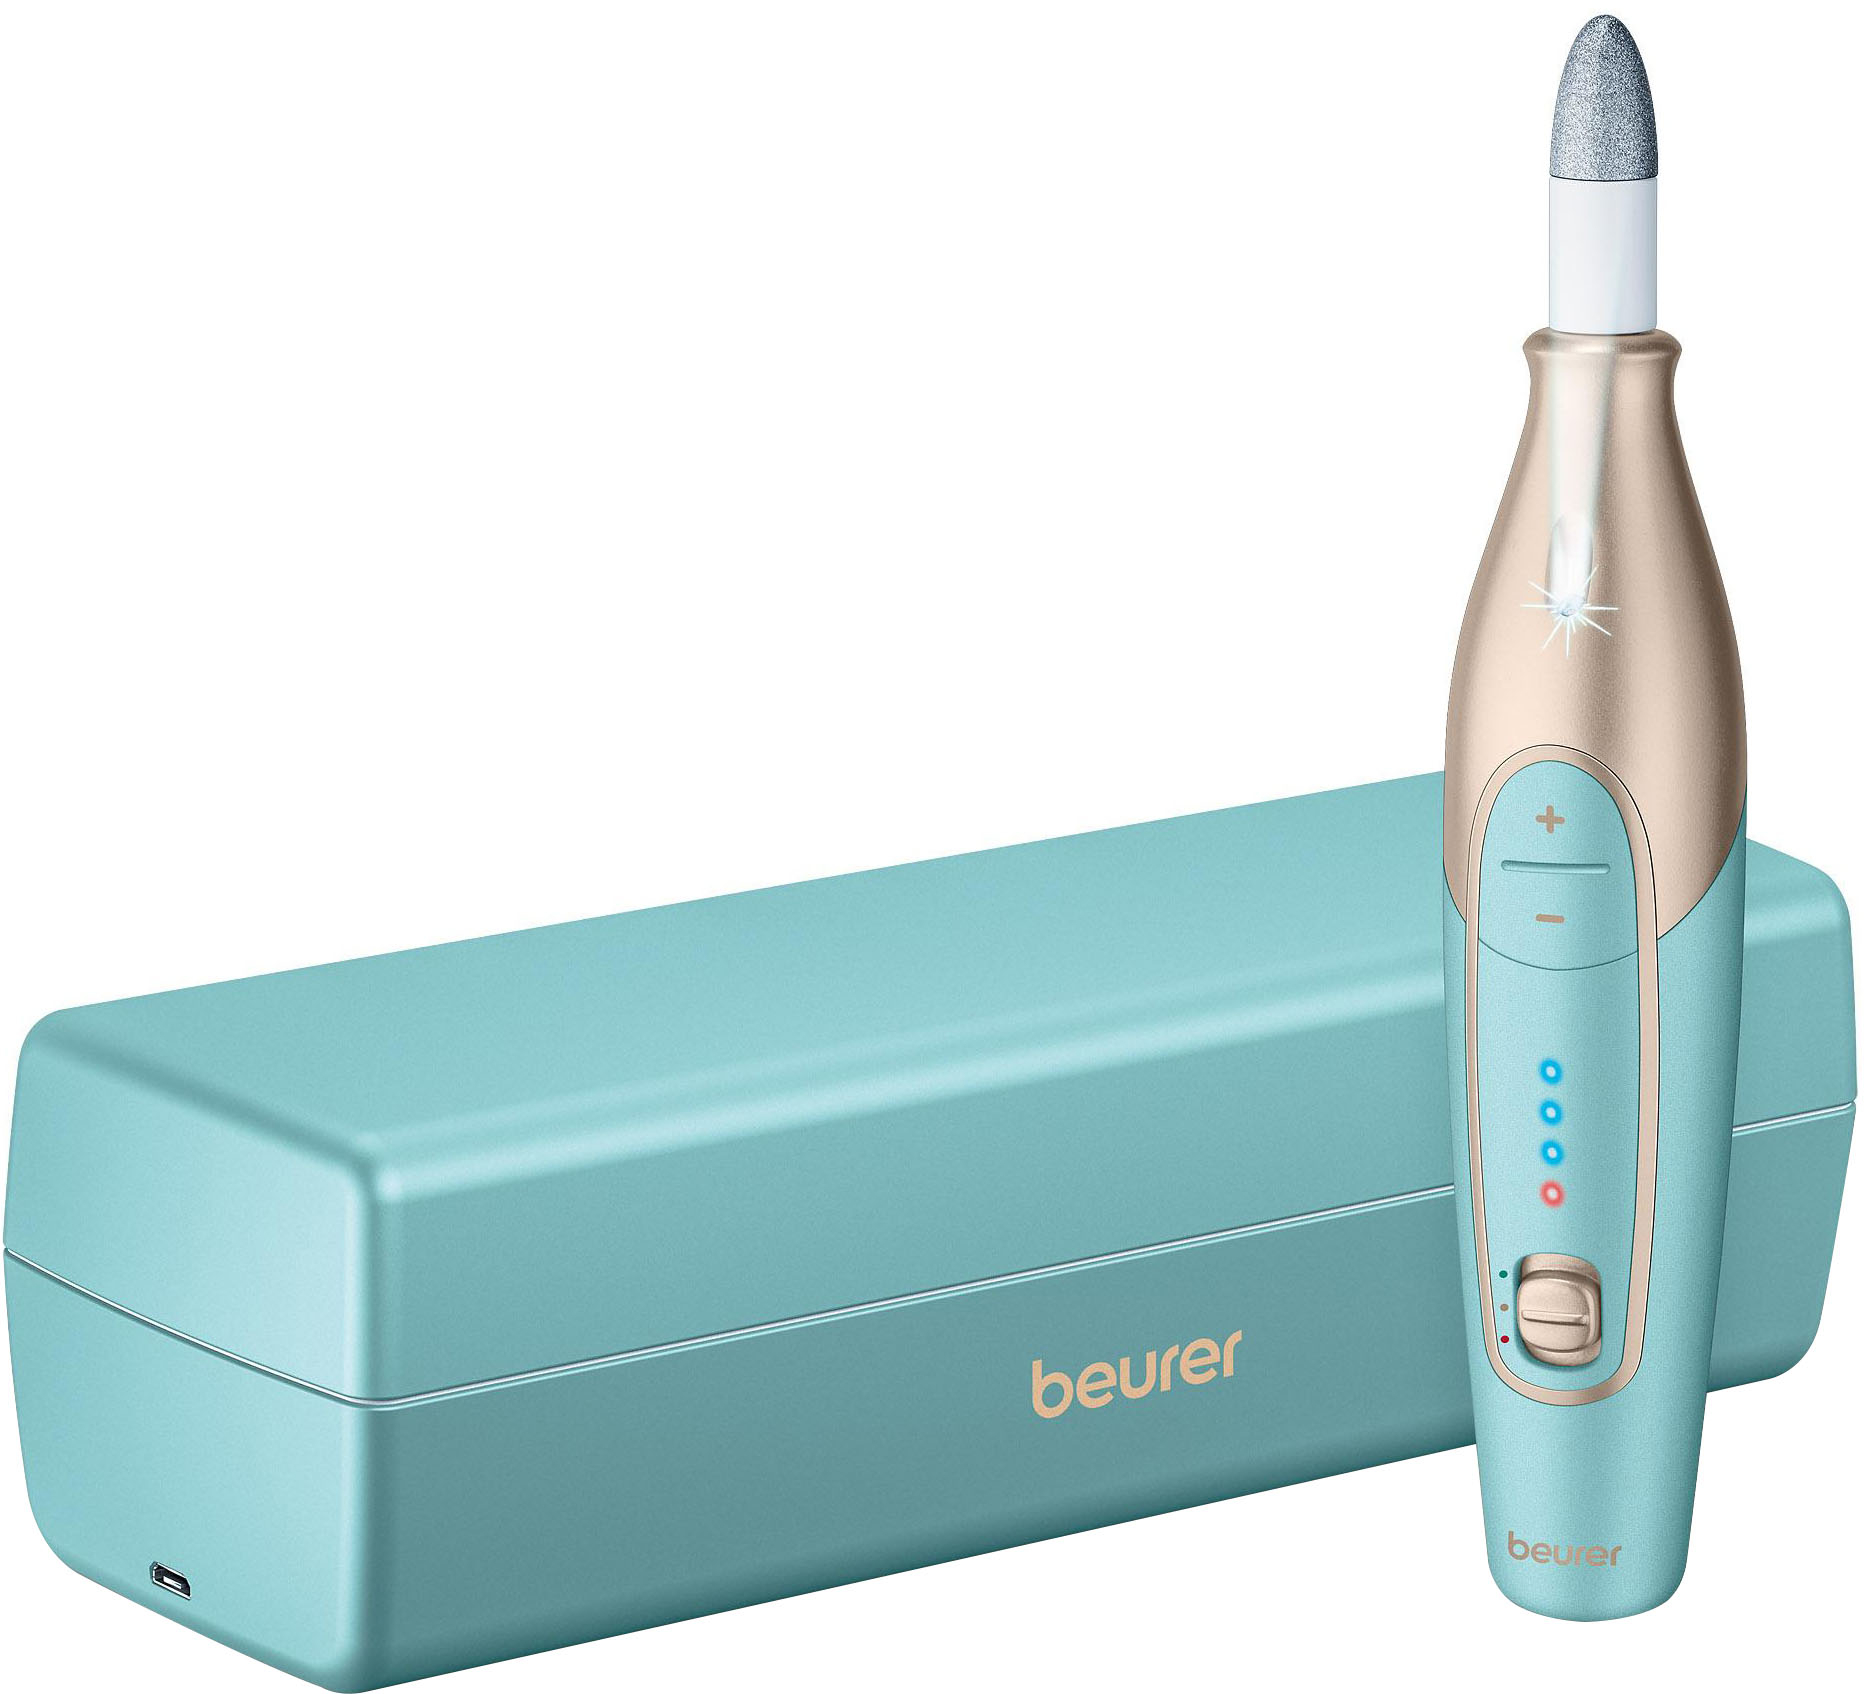 Beurer Rechargeable Manicure/Pedicure Device Turquoise/Gold MP84 - Buy